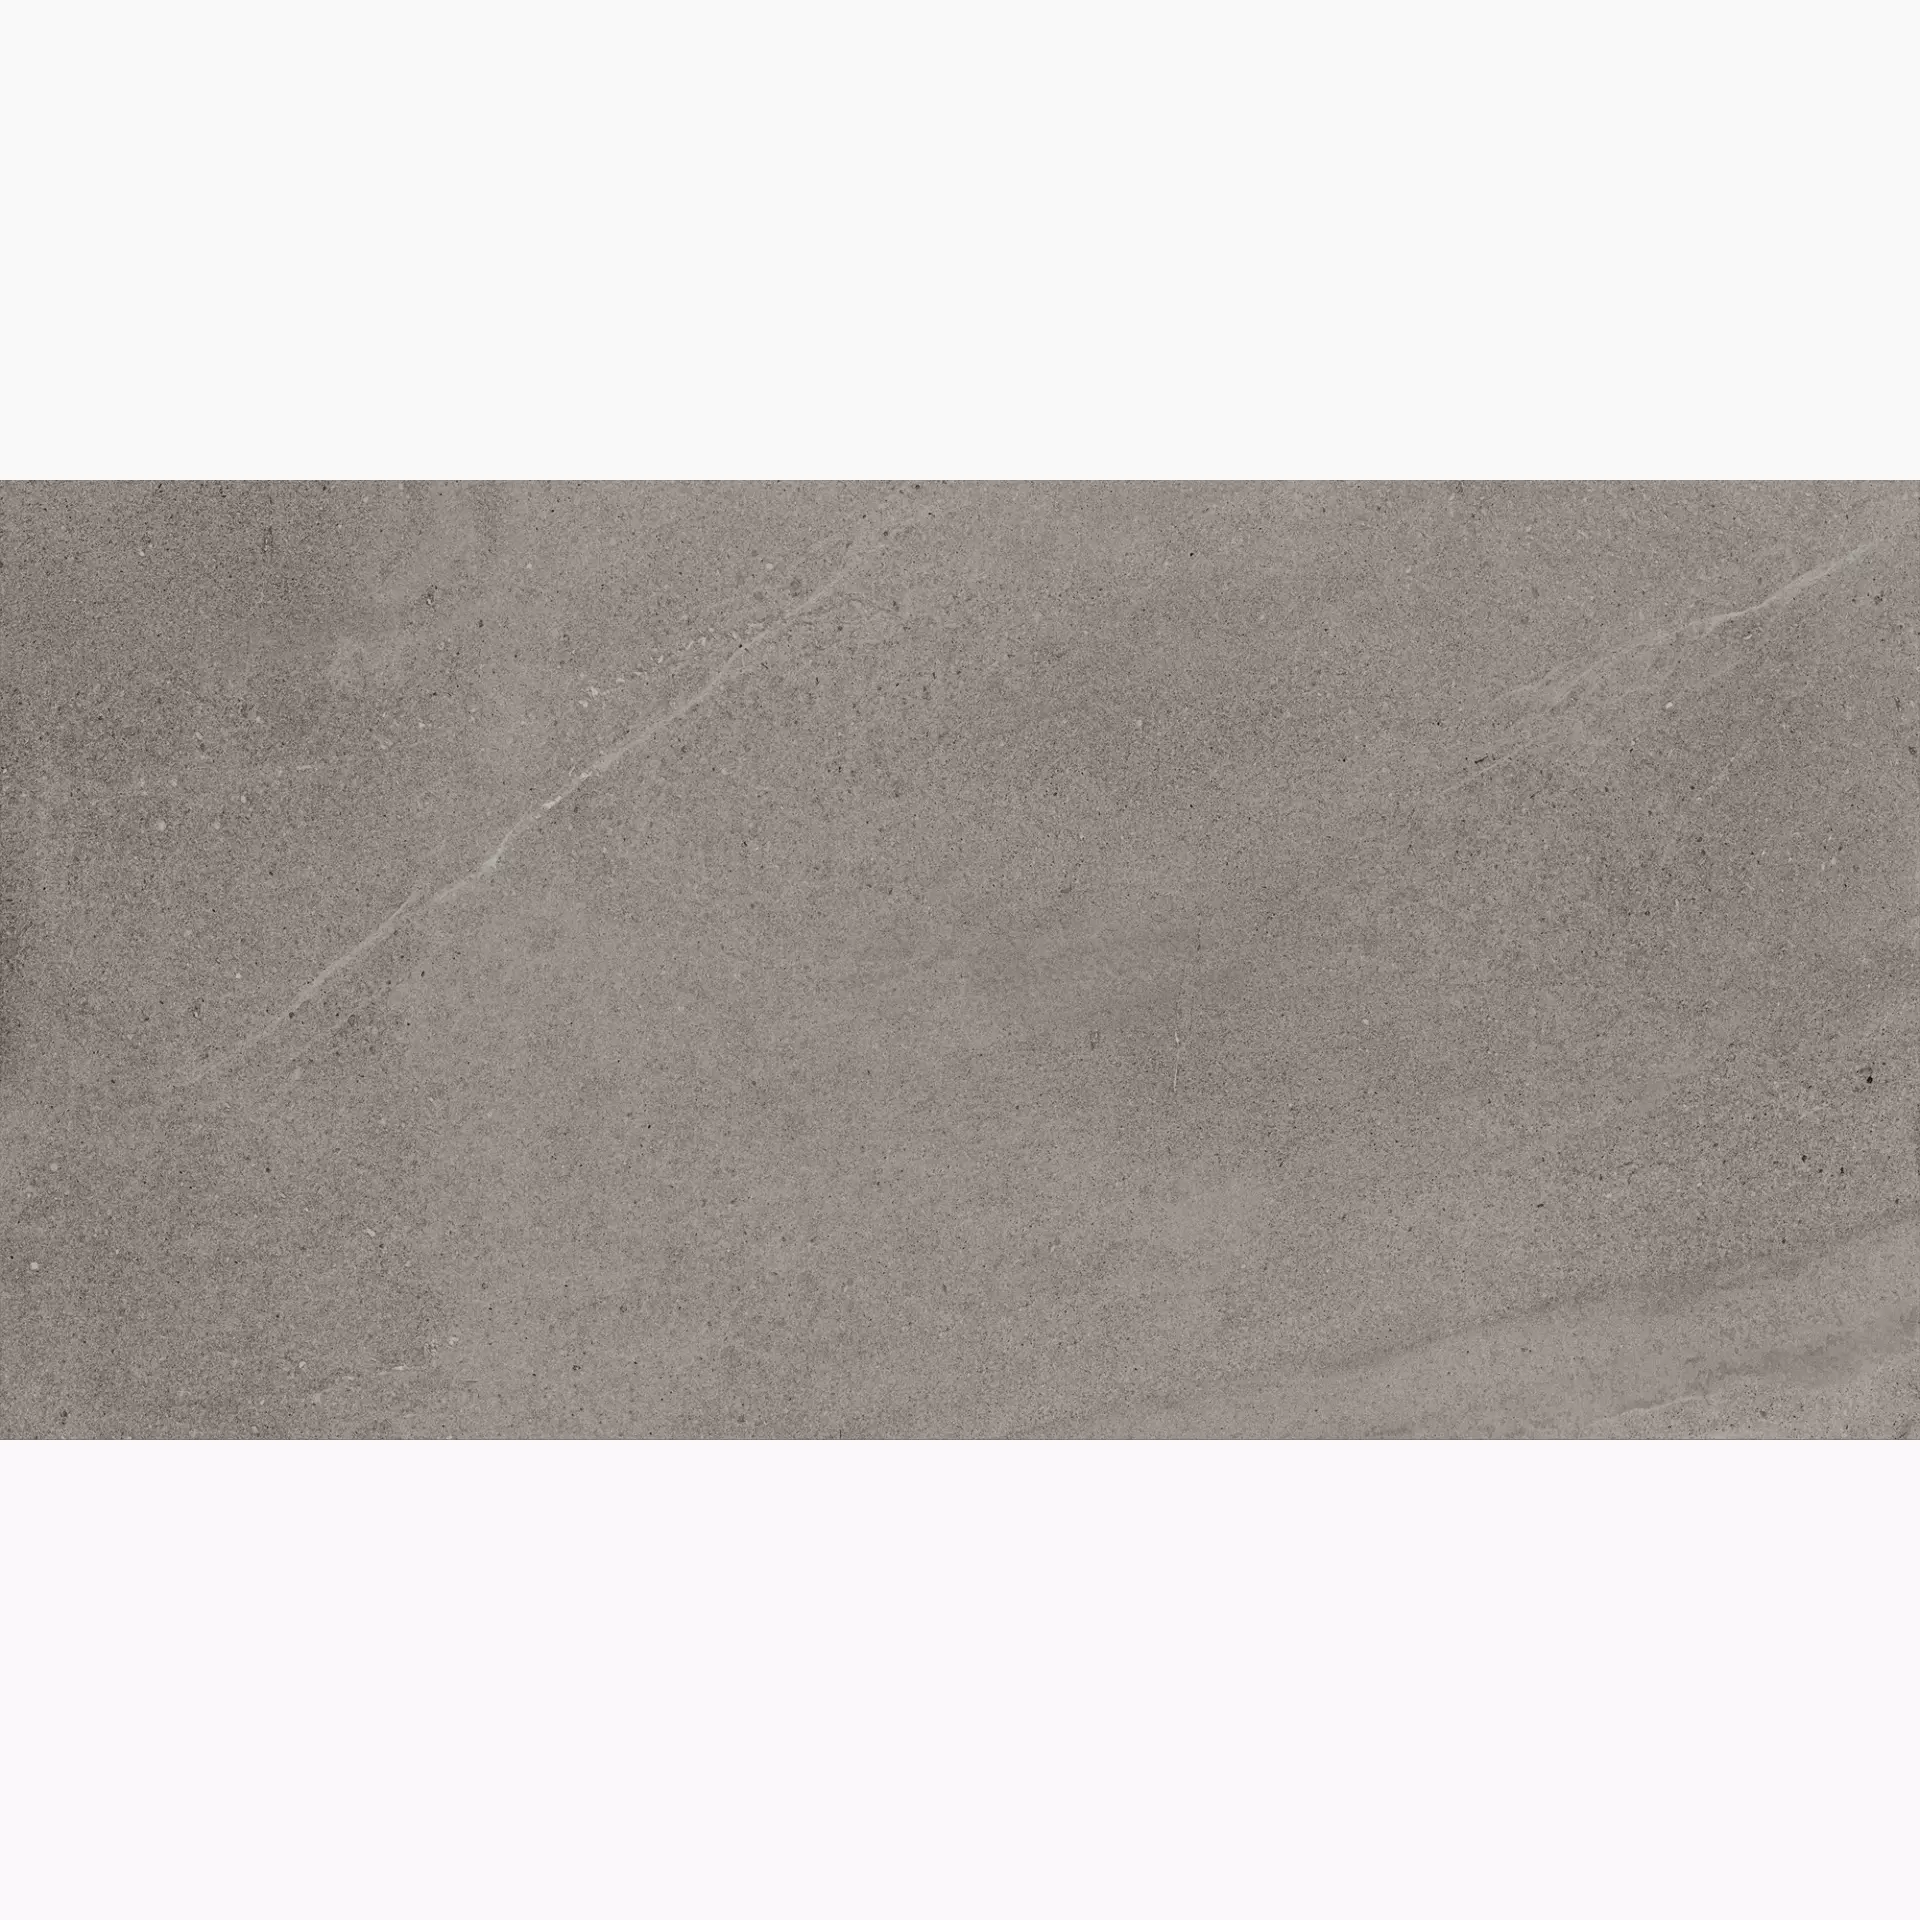 Cottodeste Limestone Slate Naturale Protect EGXLS31 60x120cm rectified 14mm